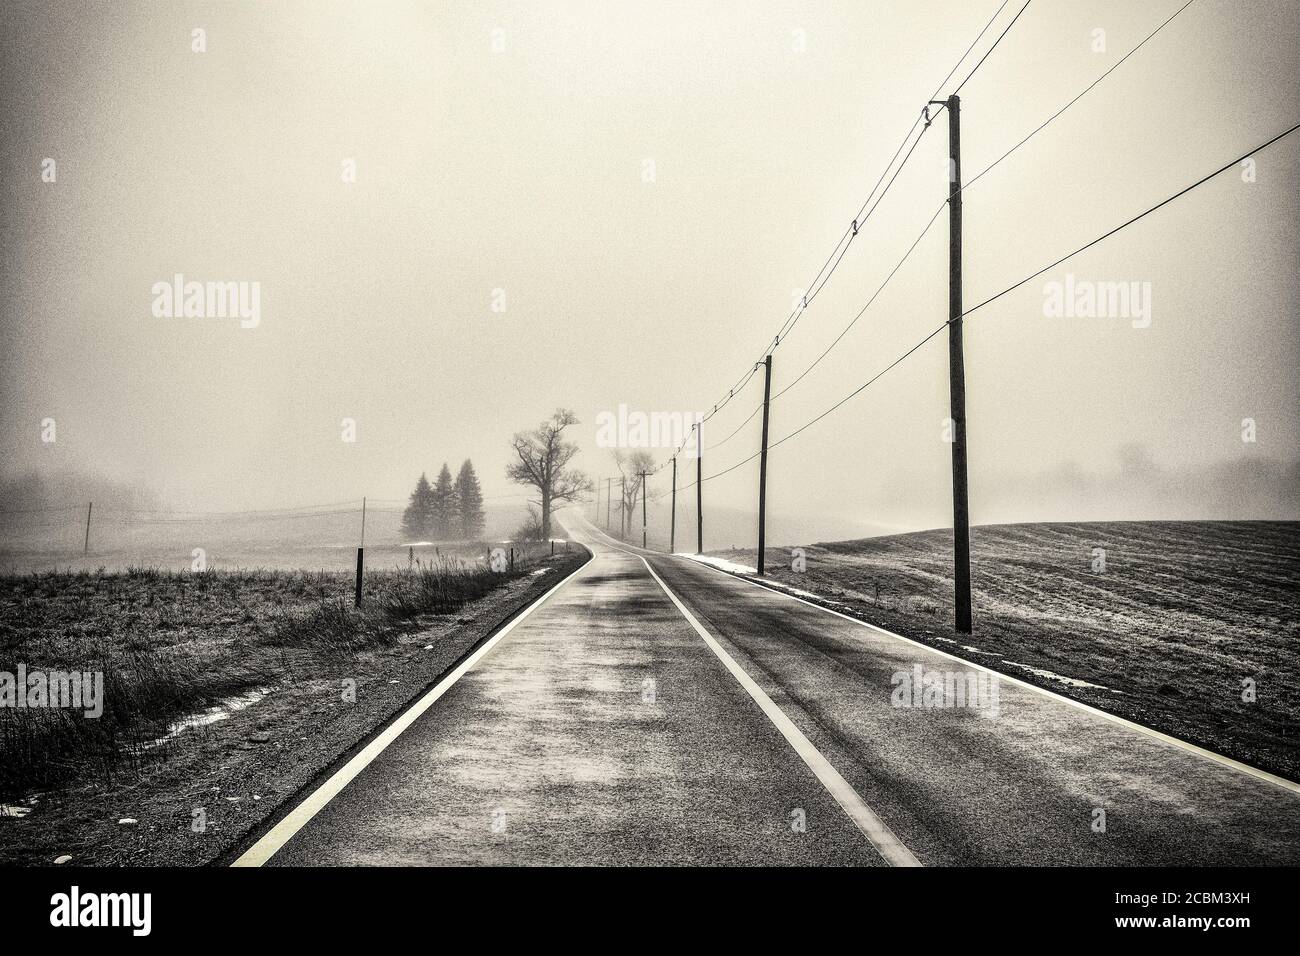 A lonely road on a foggy morning Stock Photo